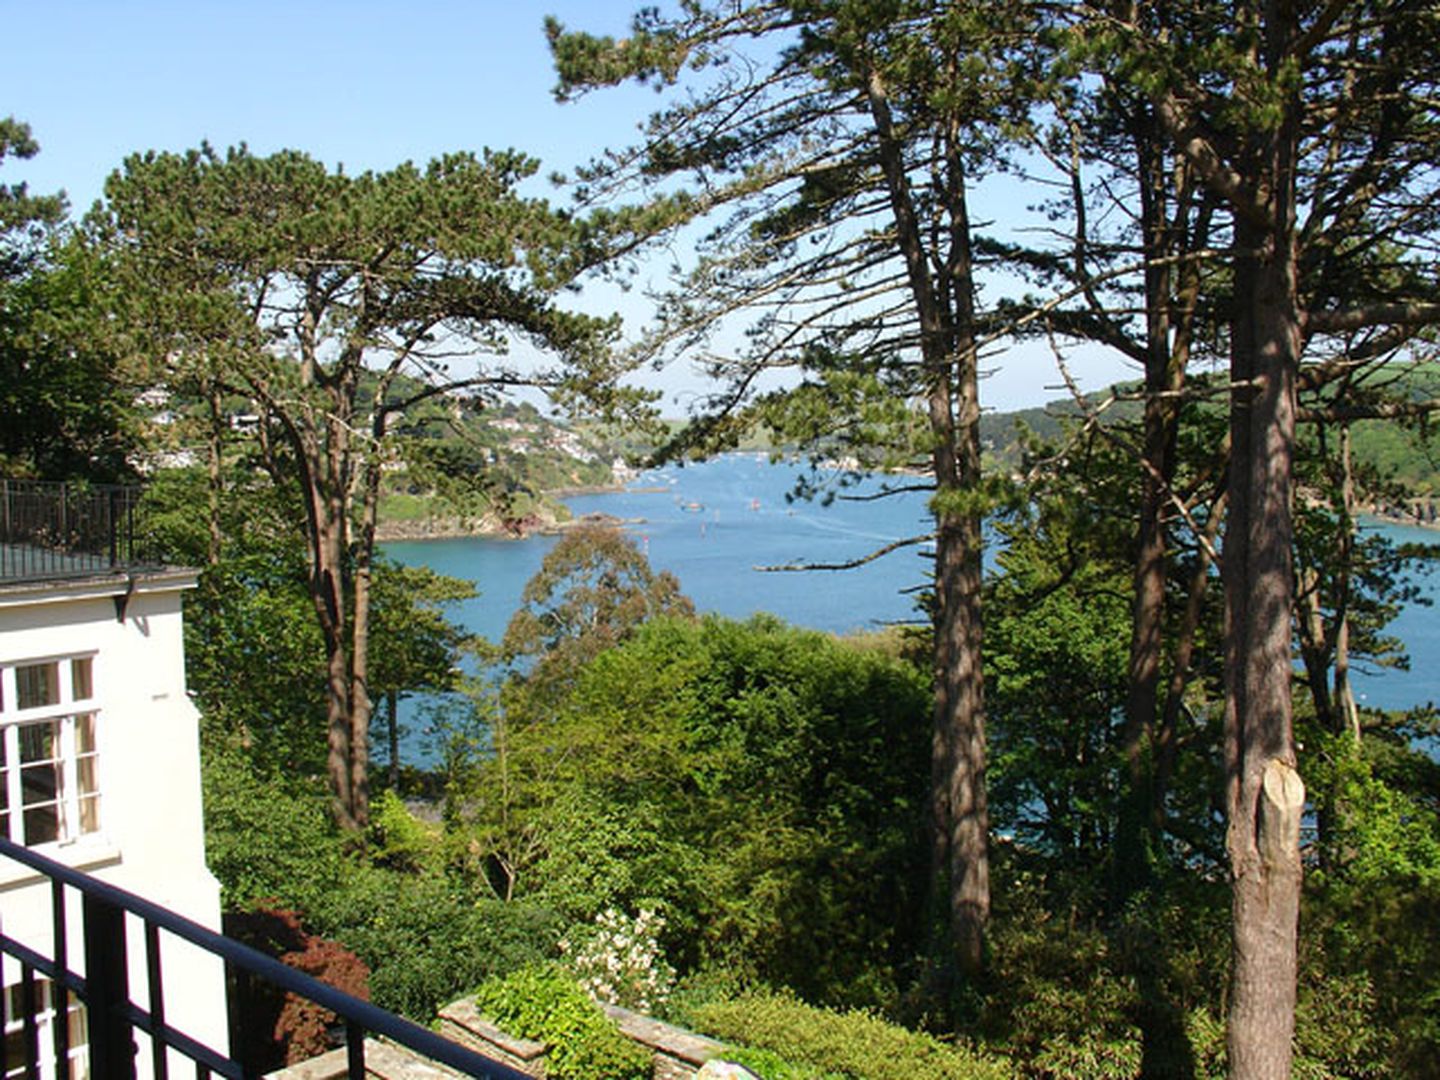 Flat 2 Salcombe View To Sea